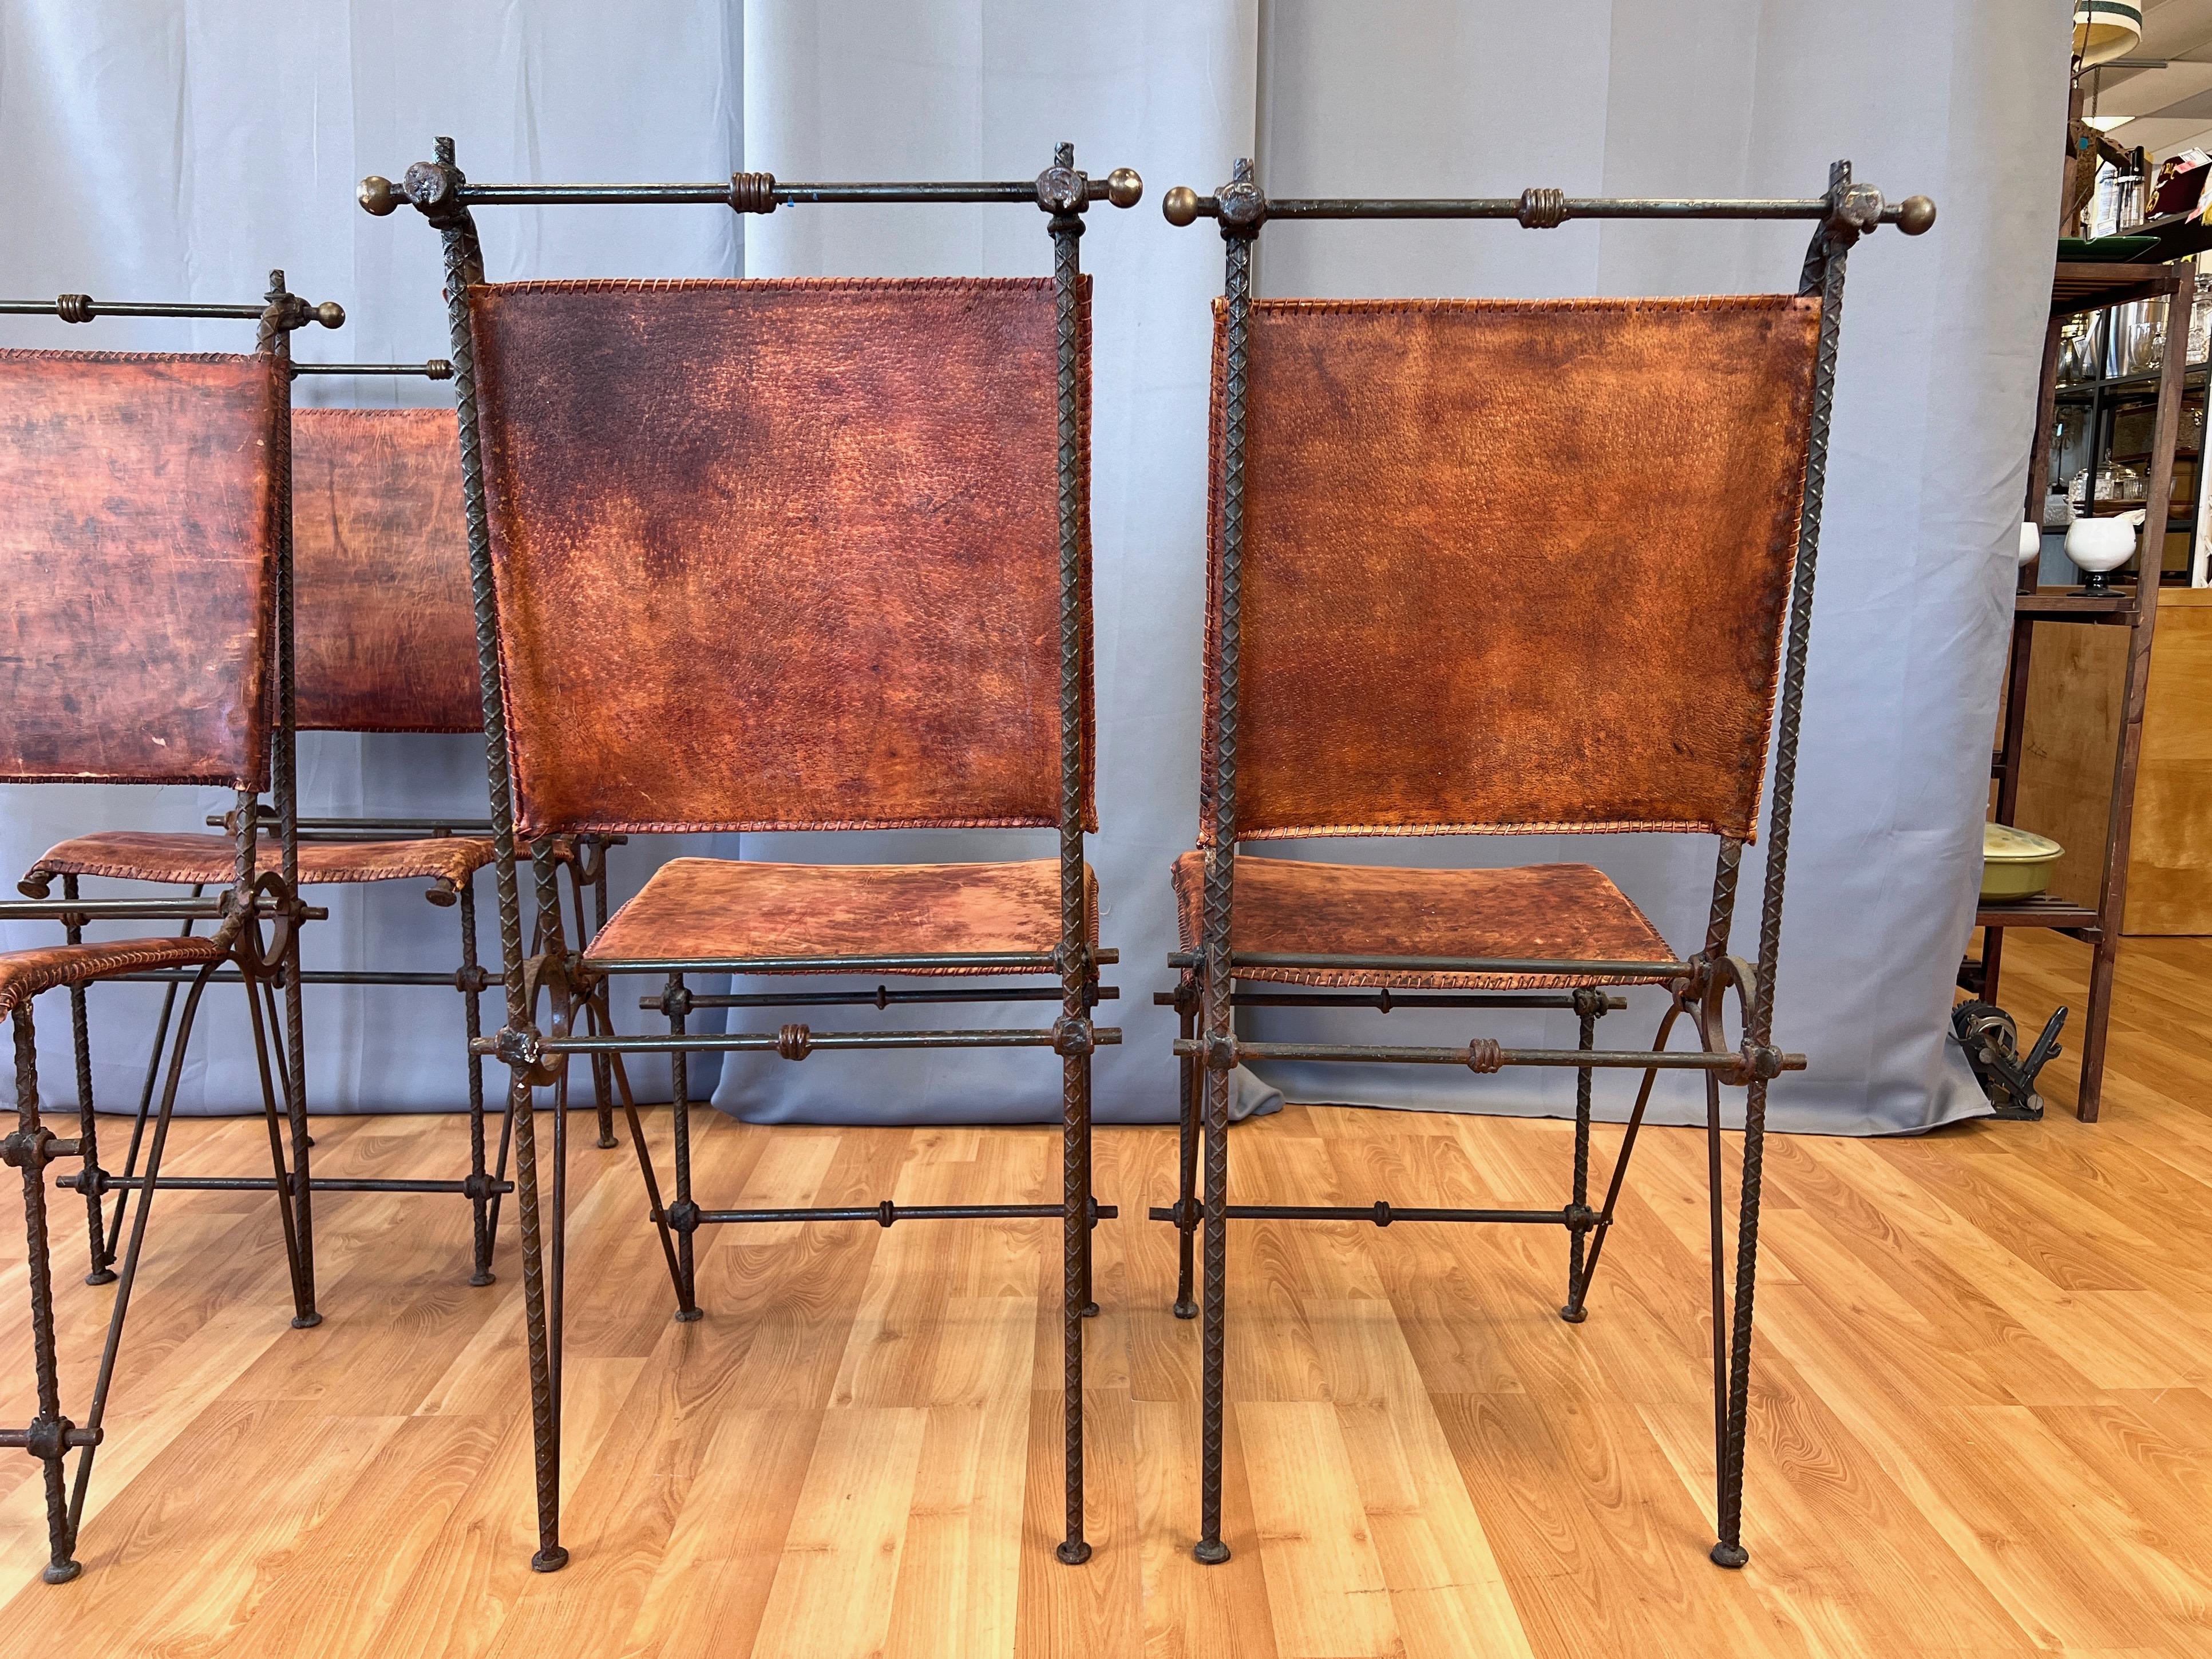 Set of 4 Ilana Goor-Attributed Brutalist Metal and Leather Dining Chairs, 1980 For Sale 4